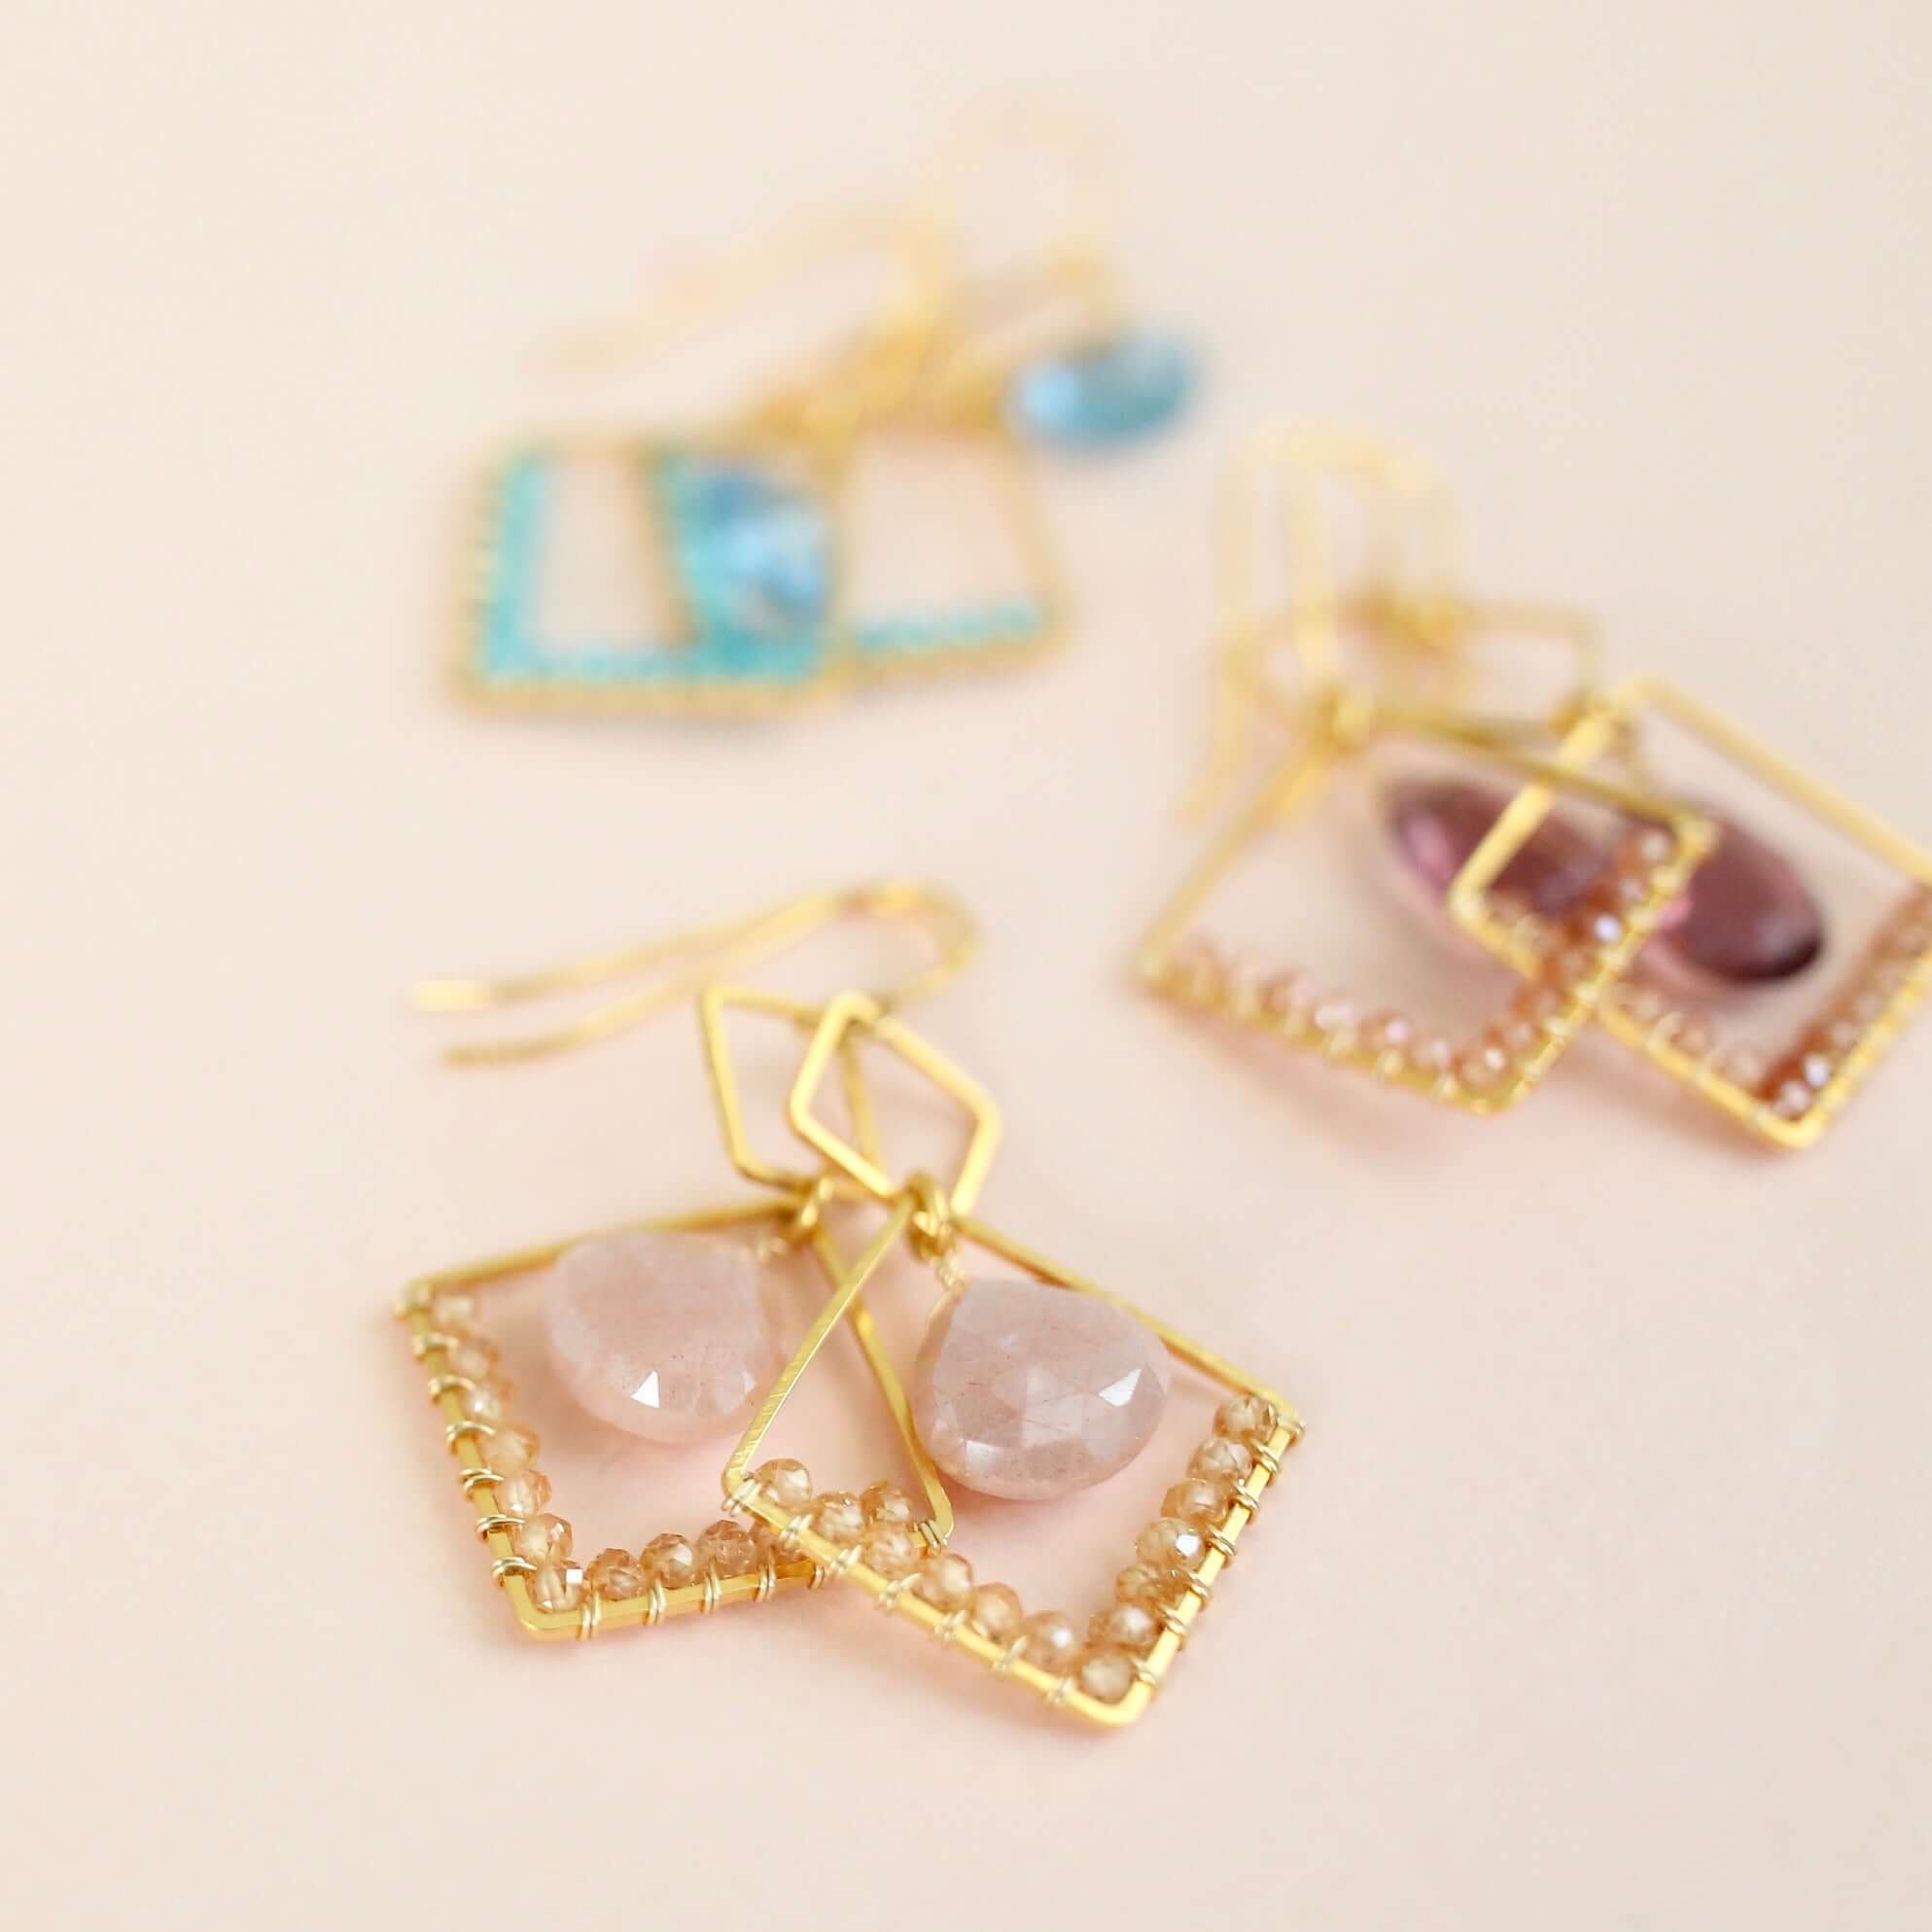  2" Gold Gemstone Triangle Earrings with French Hooks